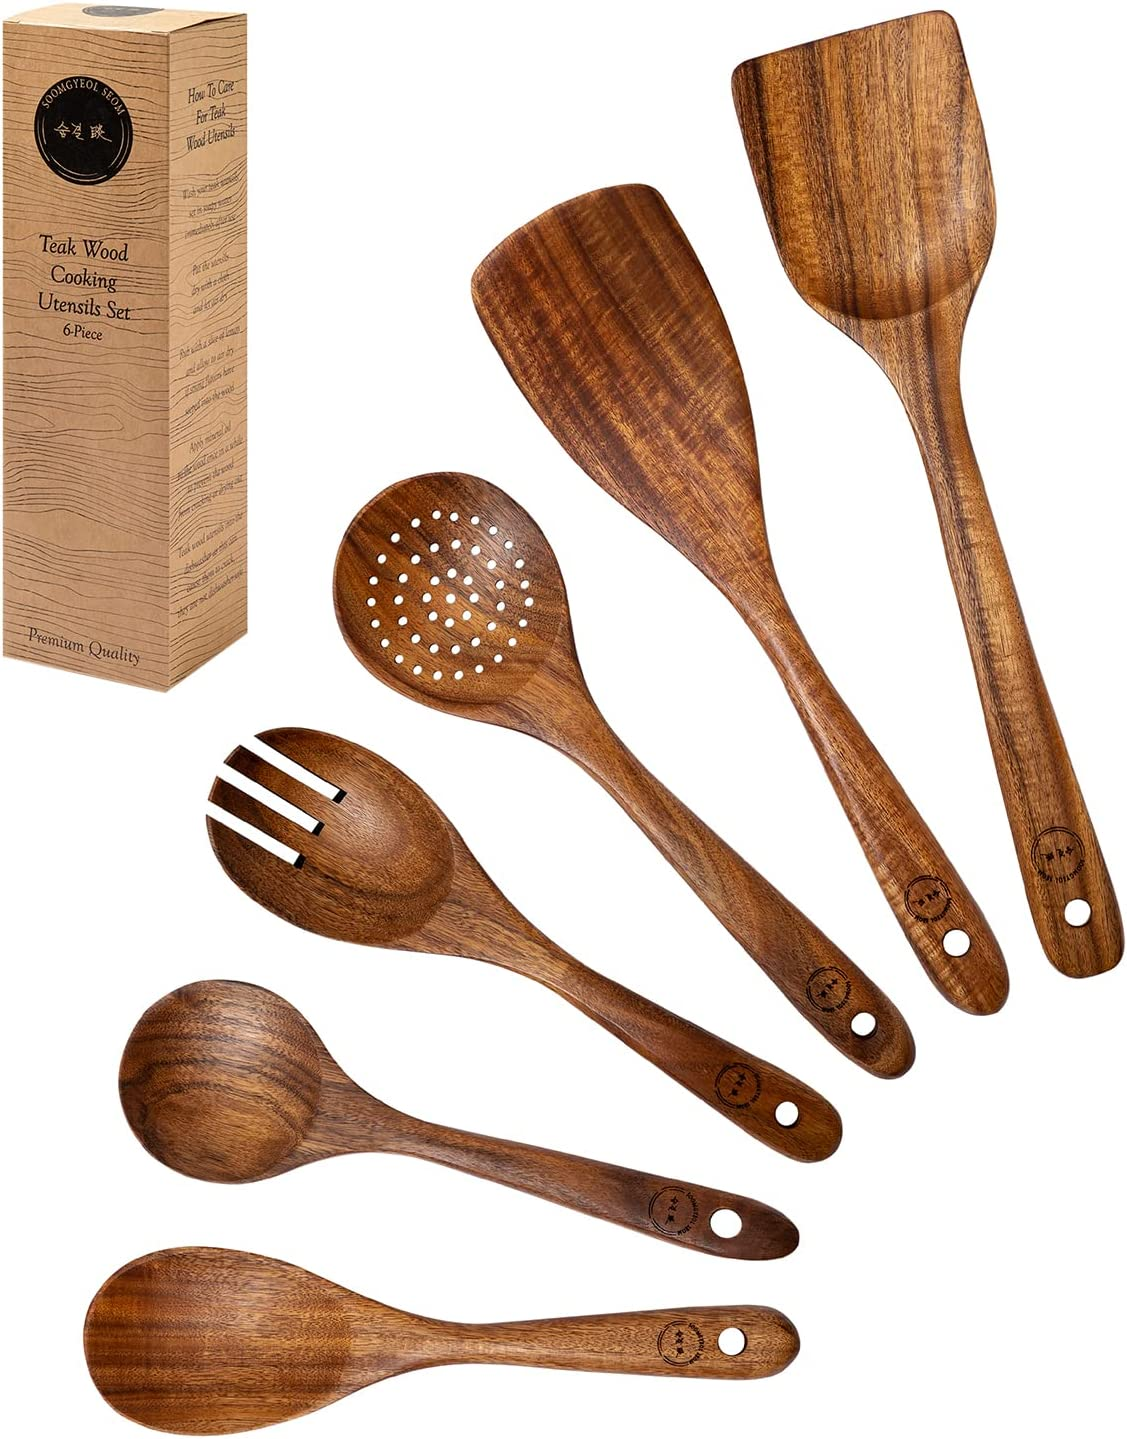 SOOMGYEOL SEOM Uncoated Premium Kitchen Utensils Set, 6-Piece Teak Wooden Cooking Utensils, Includes Non-Stick, Non-Scratching Wooden Spoons for